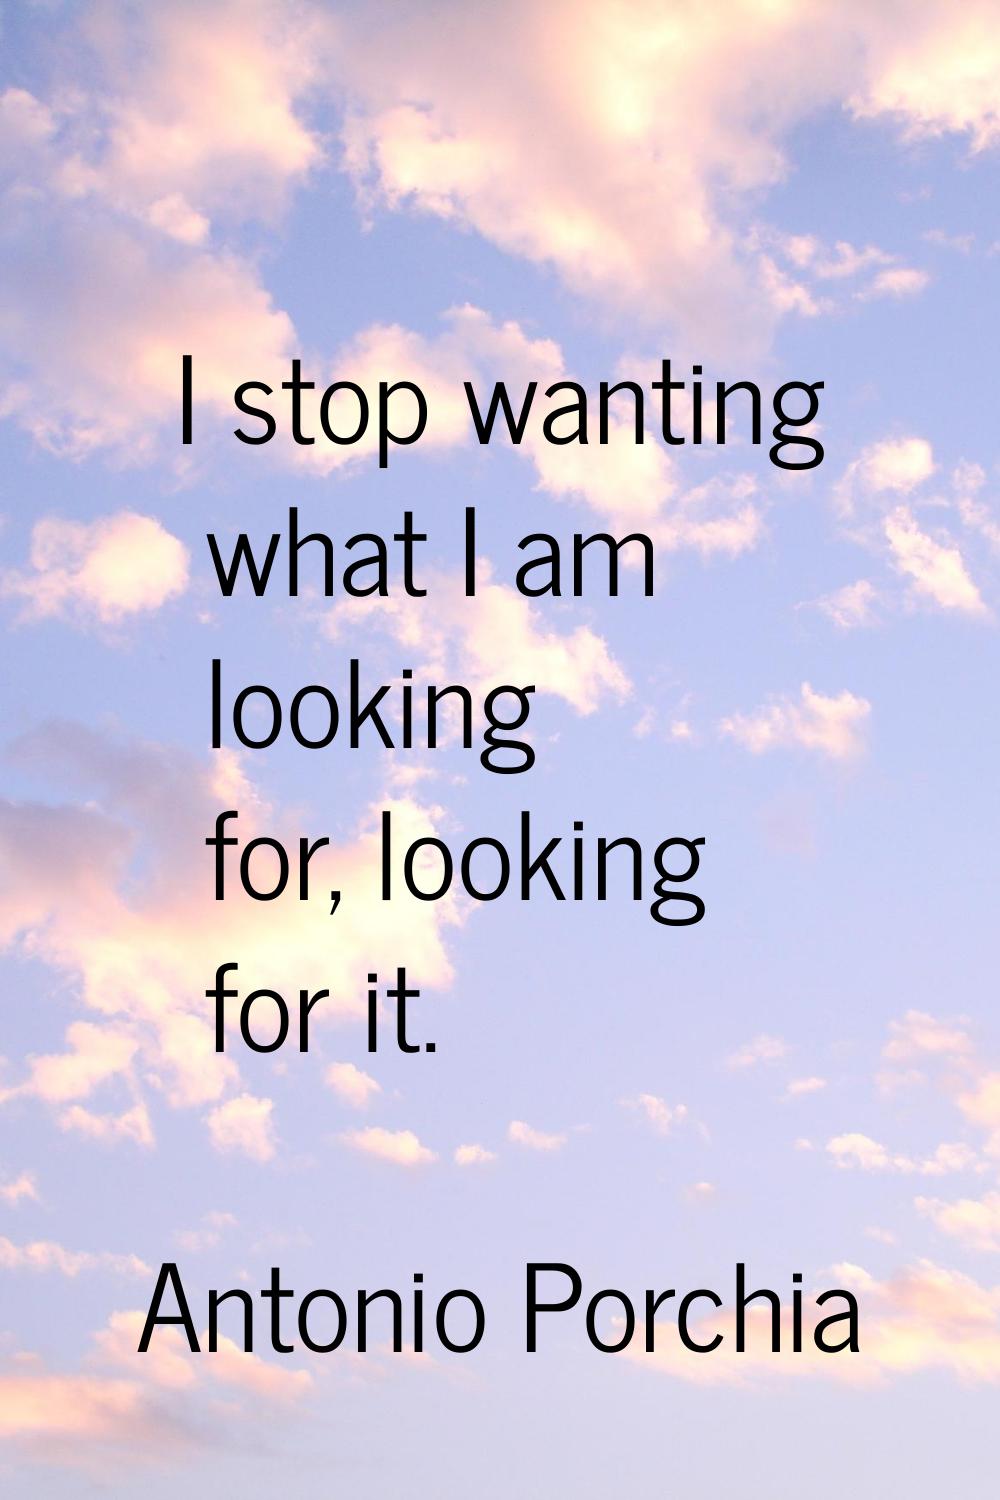 I stop wanting what I am looking for, looking for it.